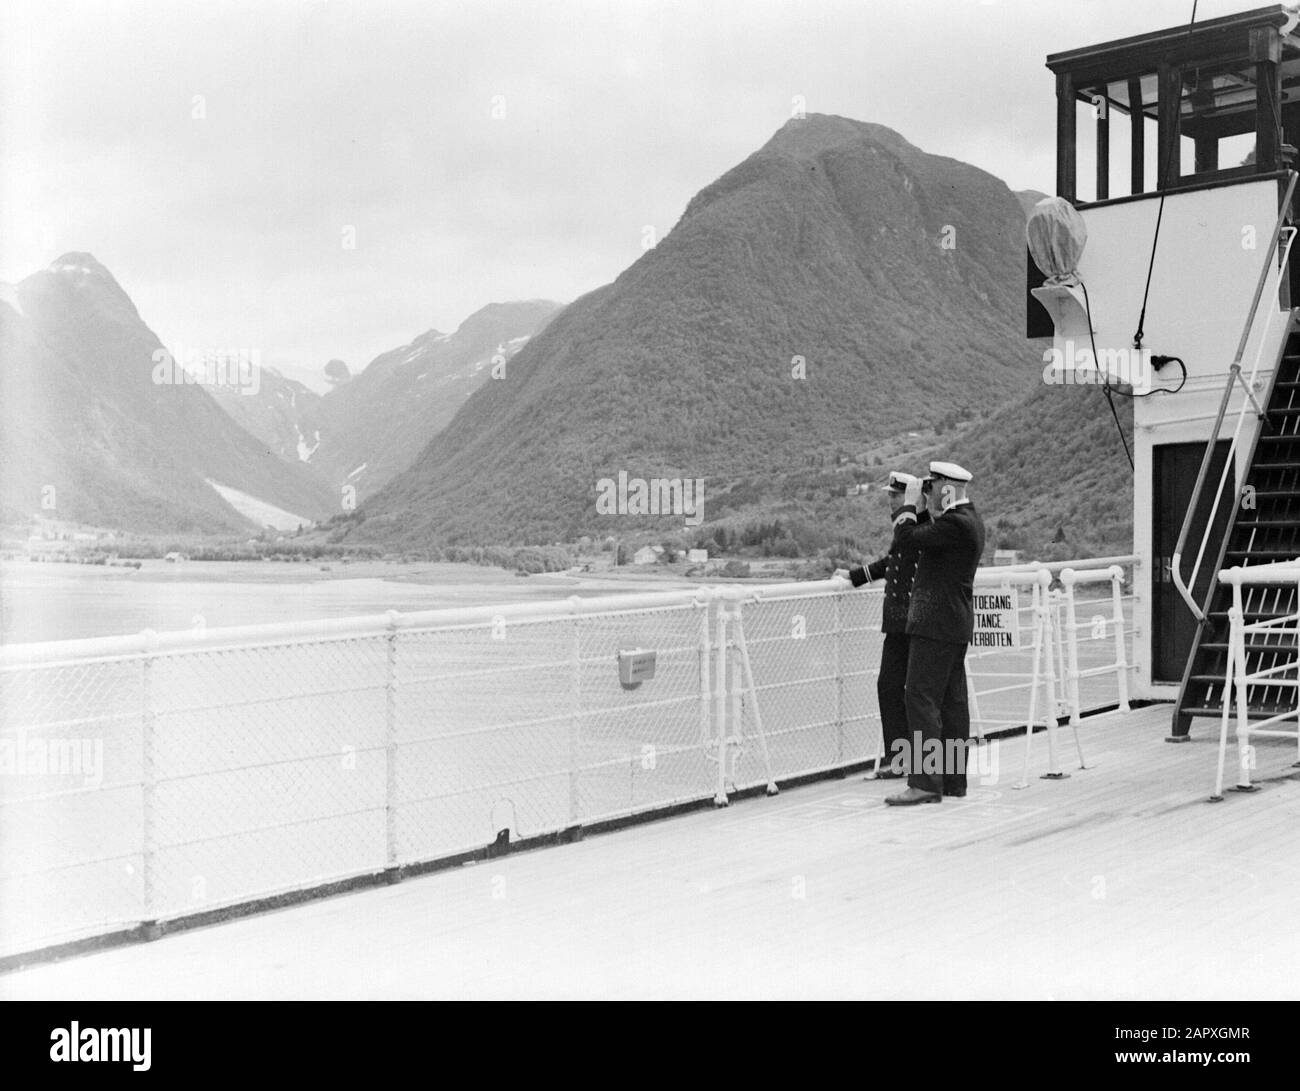 Sea voyage with MS Johan van Oldenbarnevelt to Norway  Sognefjord near Fjaerland. Two officers aboard the ship: with viewer the officer Leguit Date: 1933 Location: Fjaerland, Norway Keywords: mountains, cruises, cruise ships, fjords, fences, landscapes, officers, ships, tourism, binoculars Stock Photo